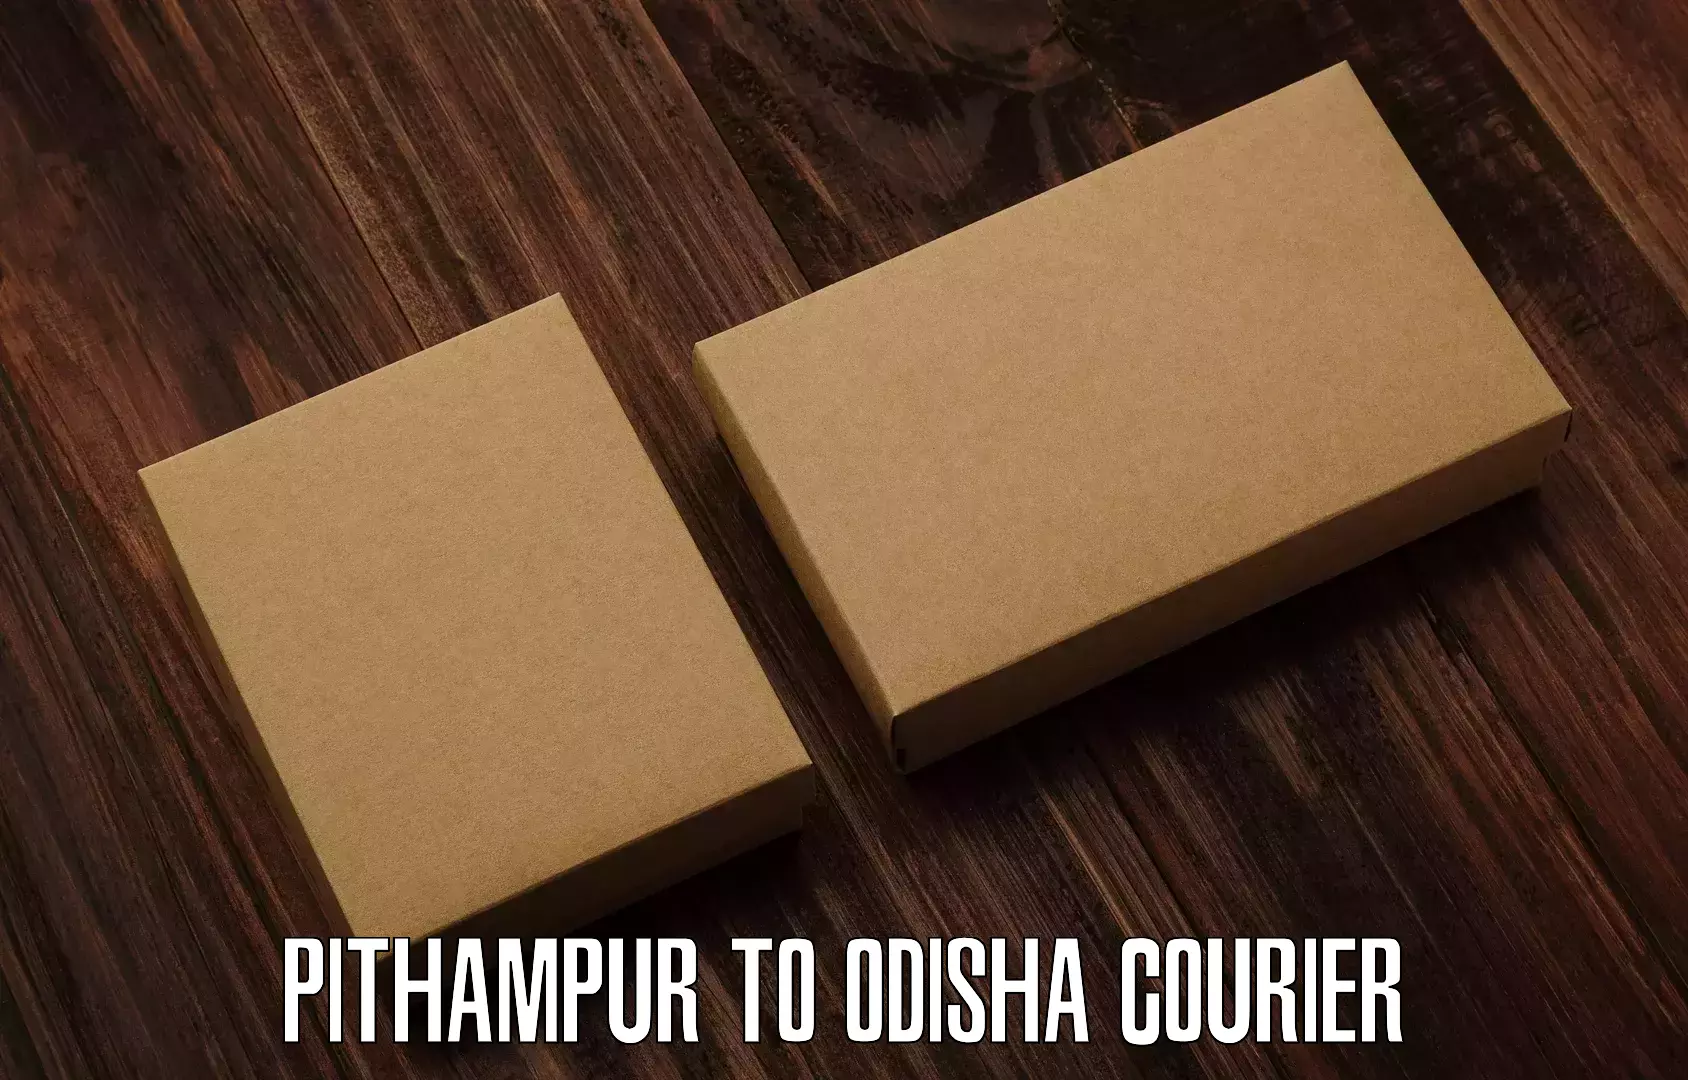 High-priority parcel service Pithampur to Pottangi